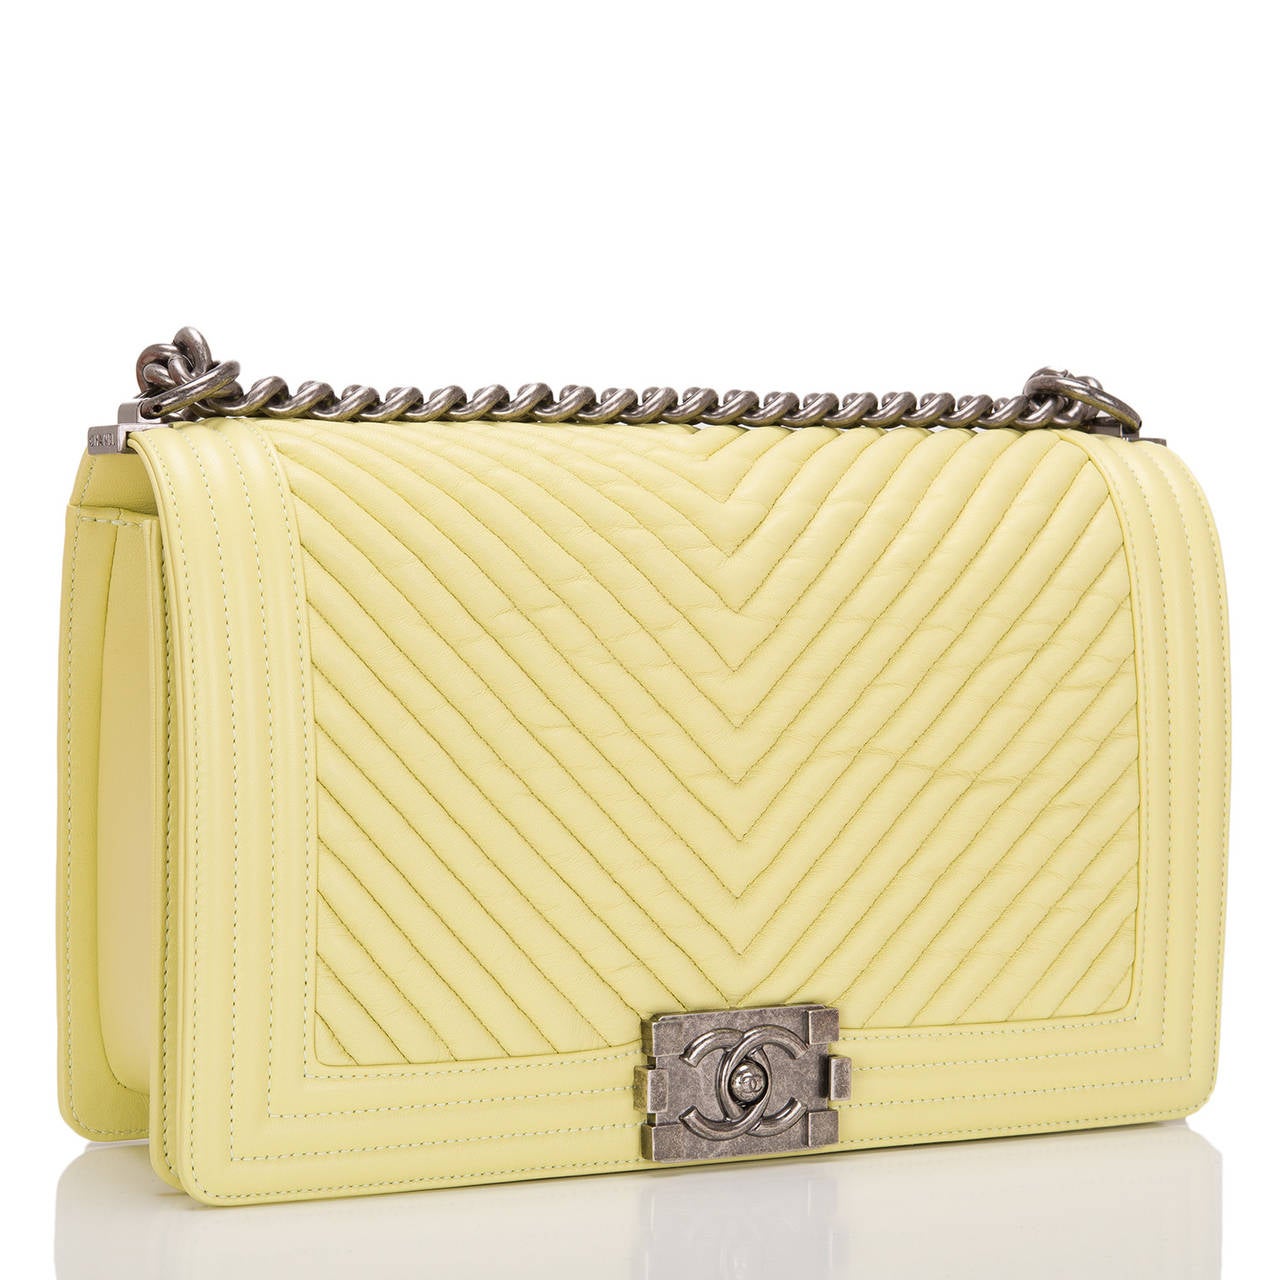 This New Medium Chevron Boy bag marries rich yellow lambskin leather with aged ruthenium hardware. The bag is of chevron quilted leather trimmed in smooth leather with smooth leather sides and bottom, a full front flap with the Boy Chanel signature